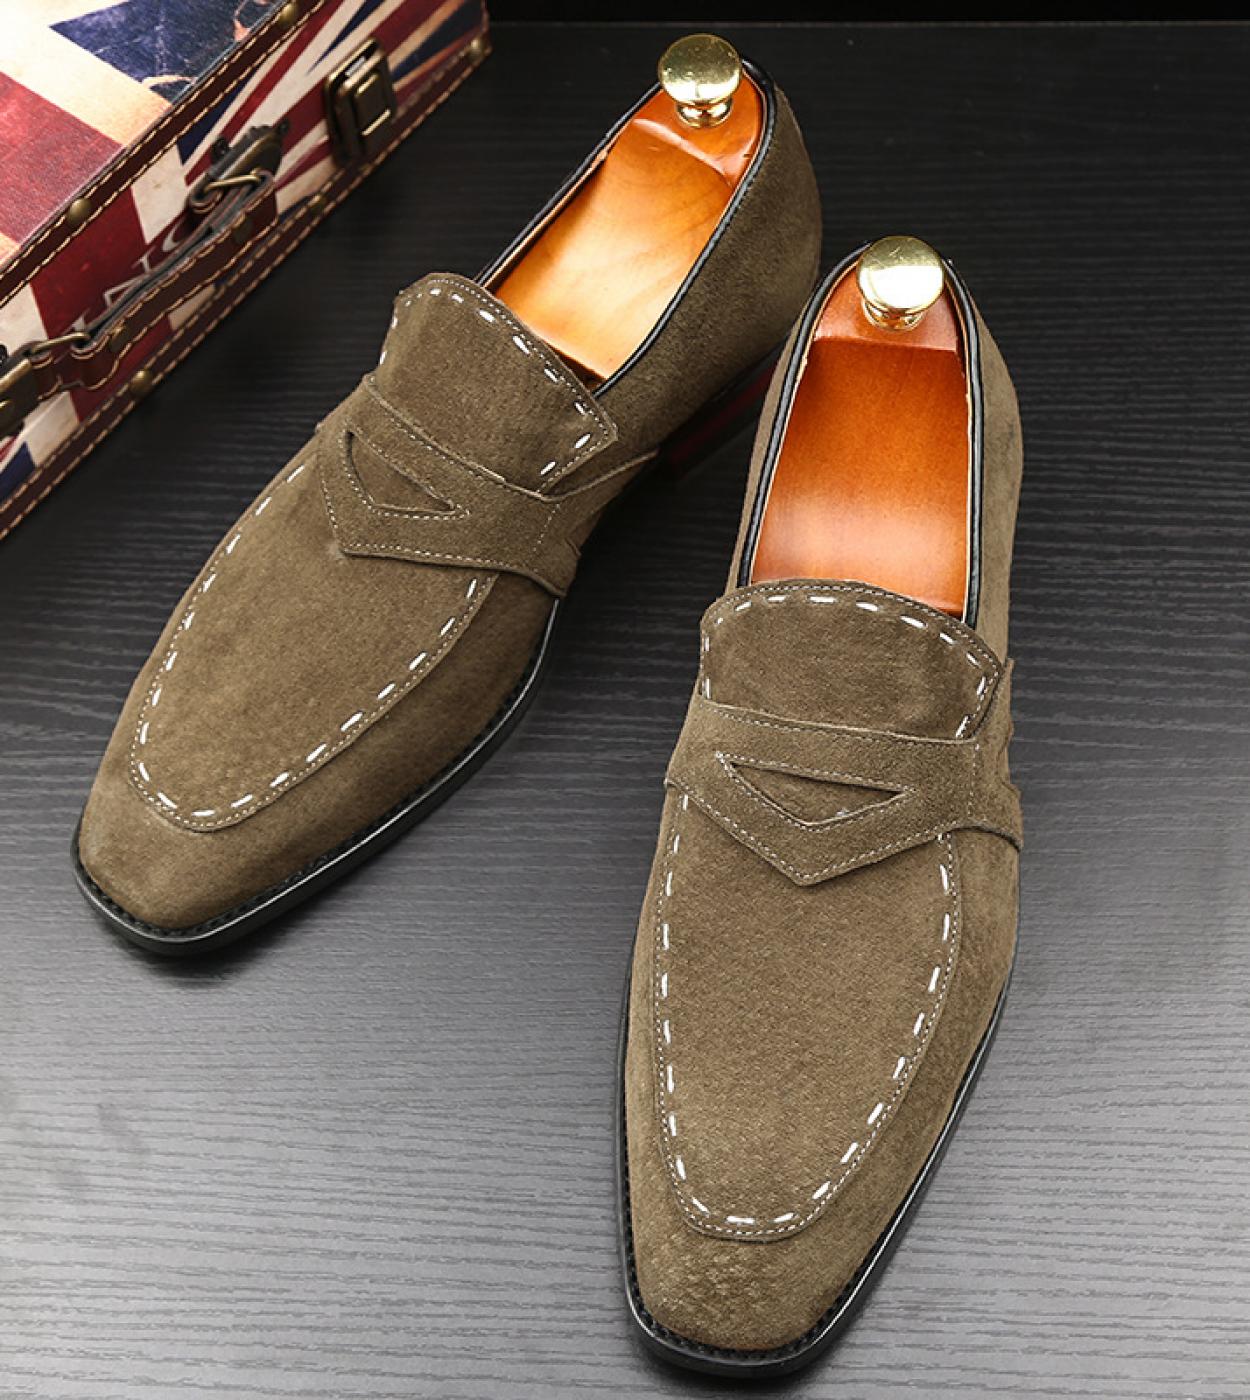 Suede Loafers Men Fashion Frosted Scrub Pointed Large Size Casual Flats Mens Dress Shoes Slip On Casual Footwear